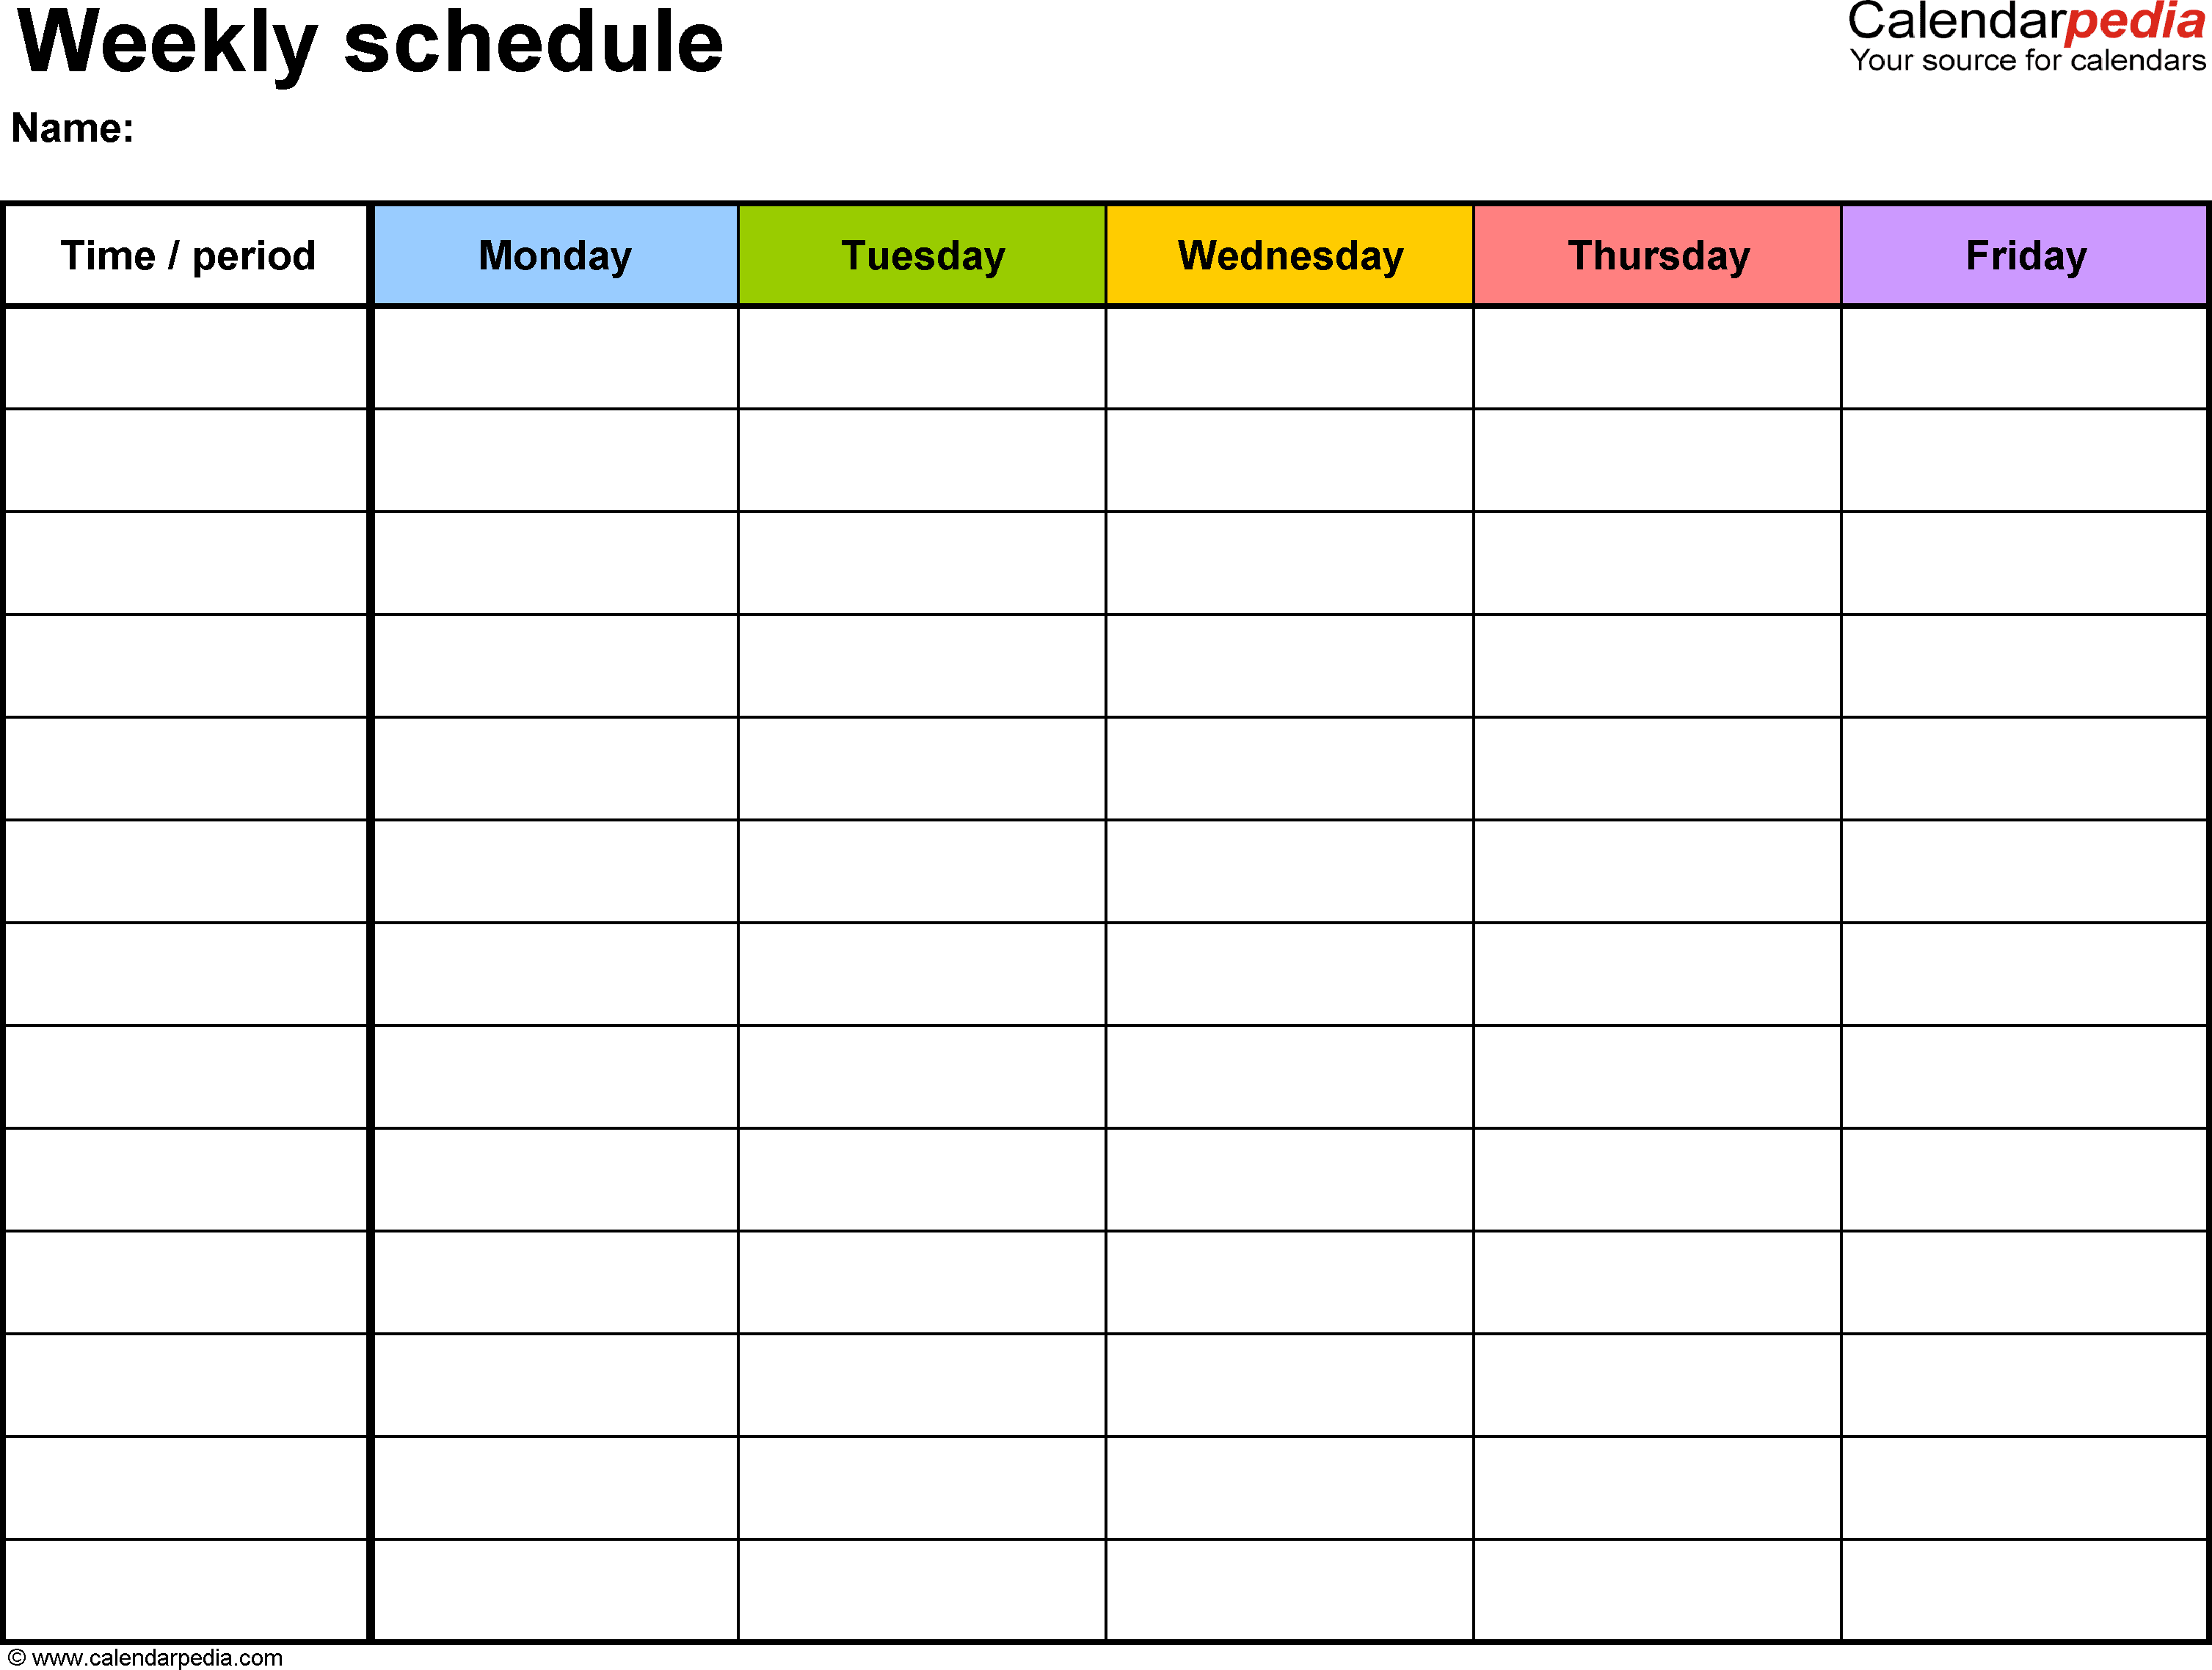 80 Online Daily Agenda Template Pdf in Word for Daily Agenda Template Pdf